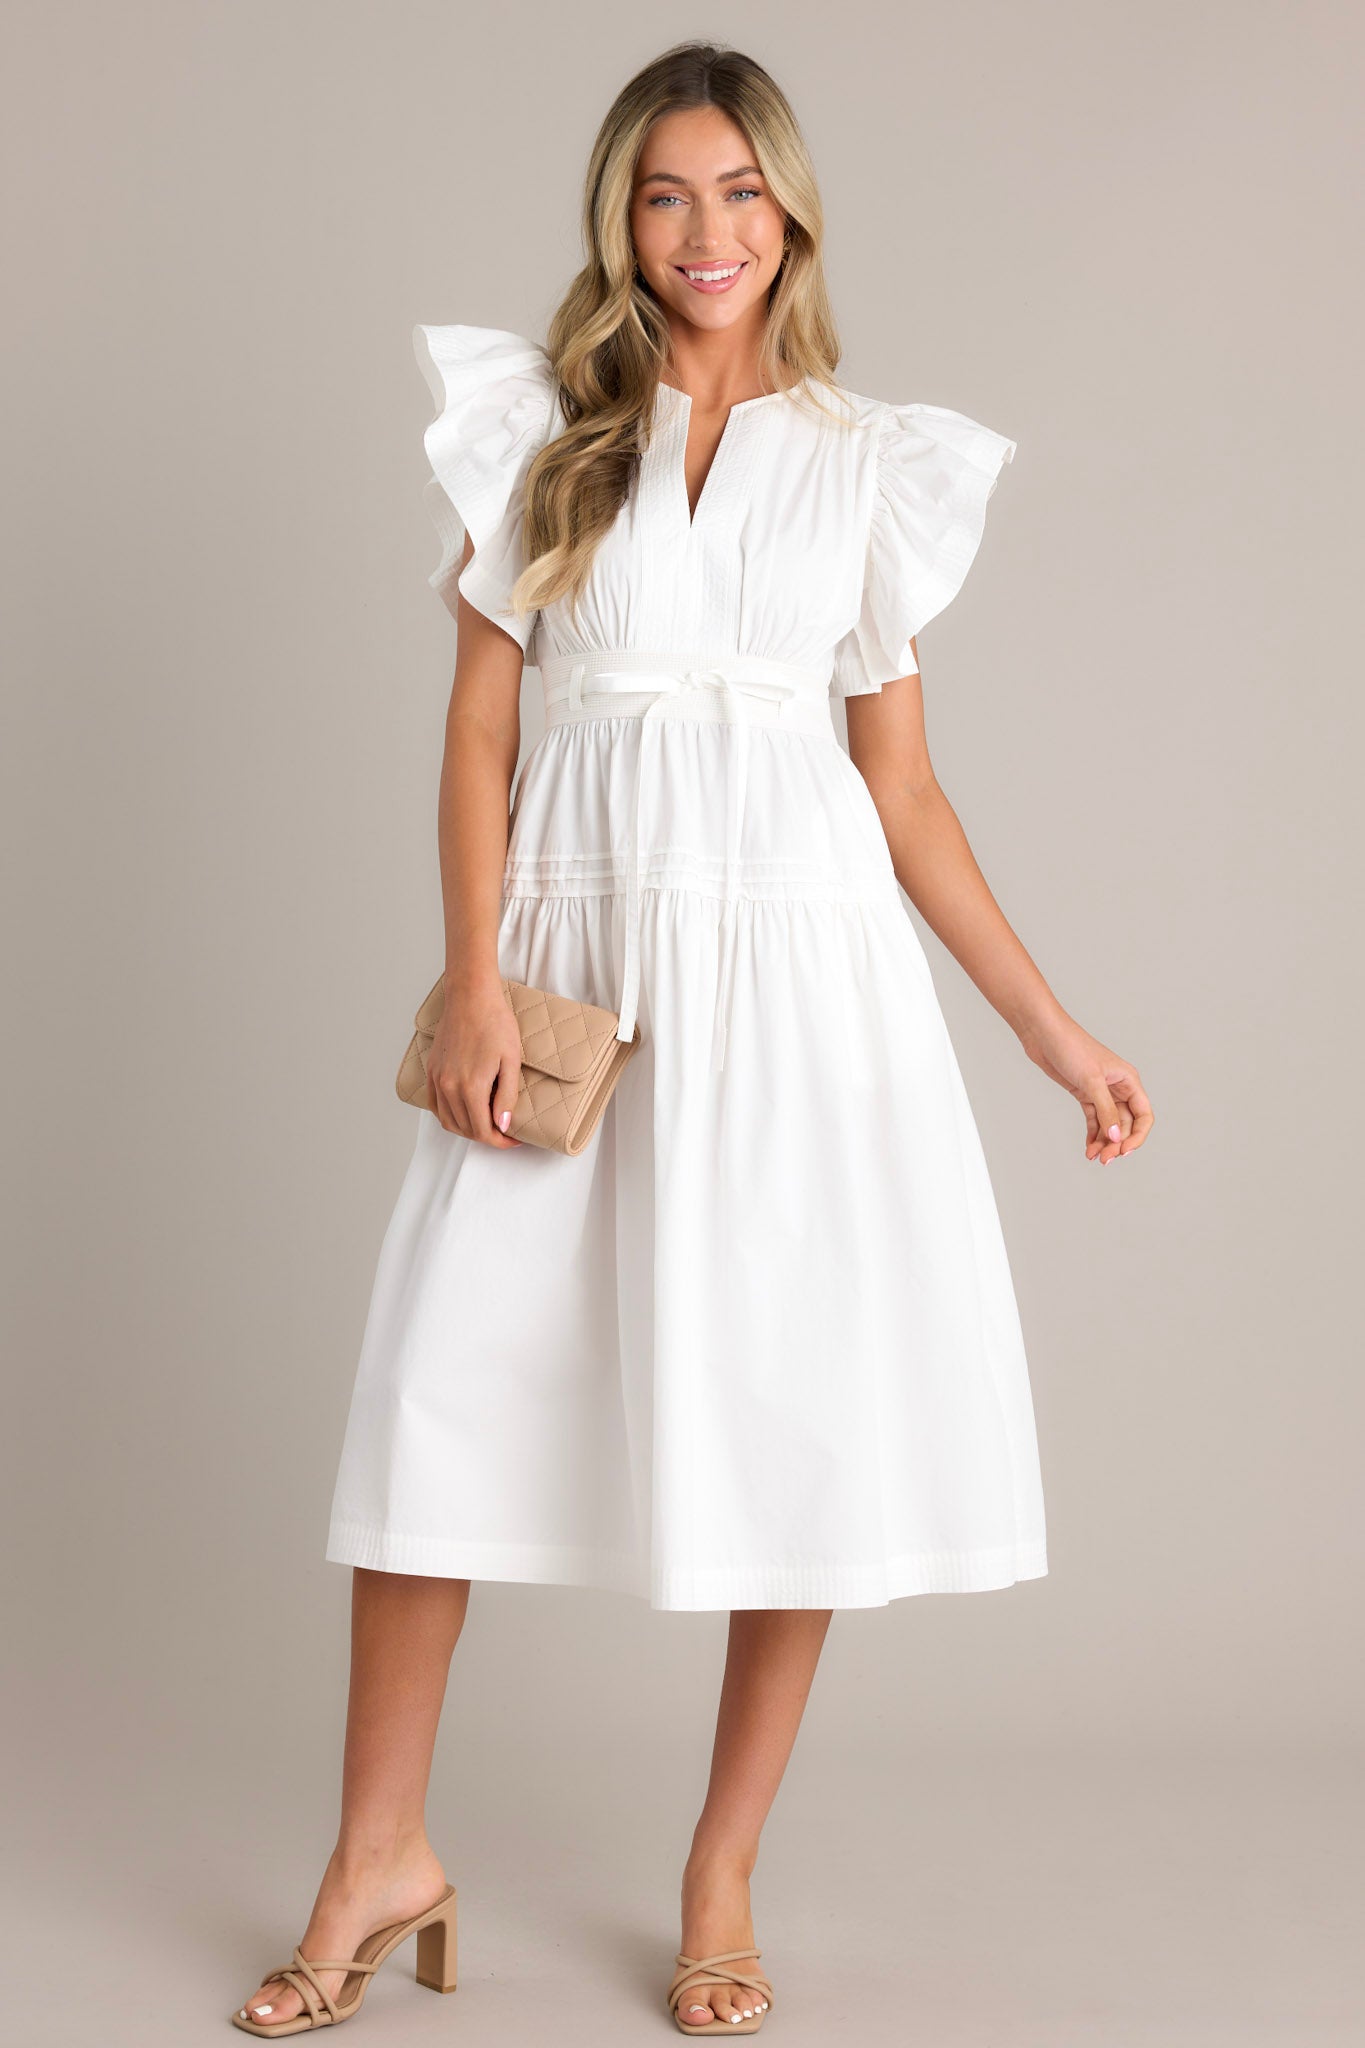 This white midi dress features a v-neckline, subtle chest pleats, a discrete side zipper, a thick waistband with a self-tie belt, a smocked waist insert, functional hip pockets, a single tier, and ruffled short sleeves.